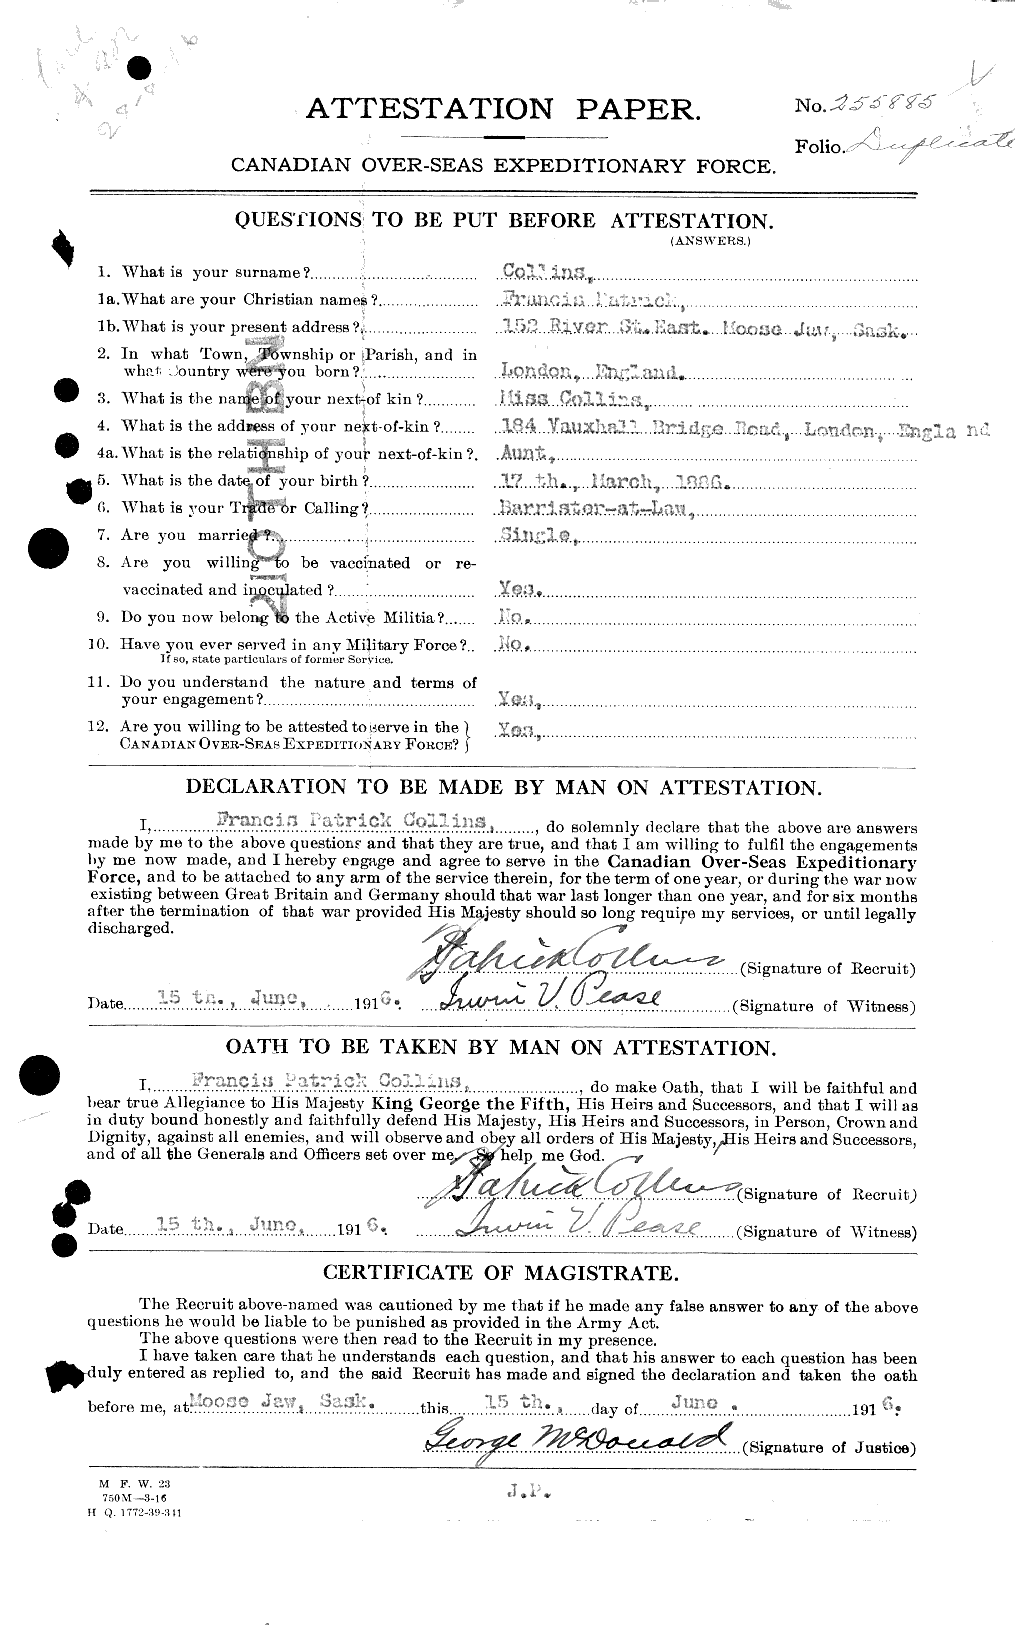 Personnel Records of the First World War - CEF 037817a